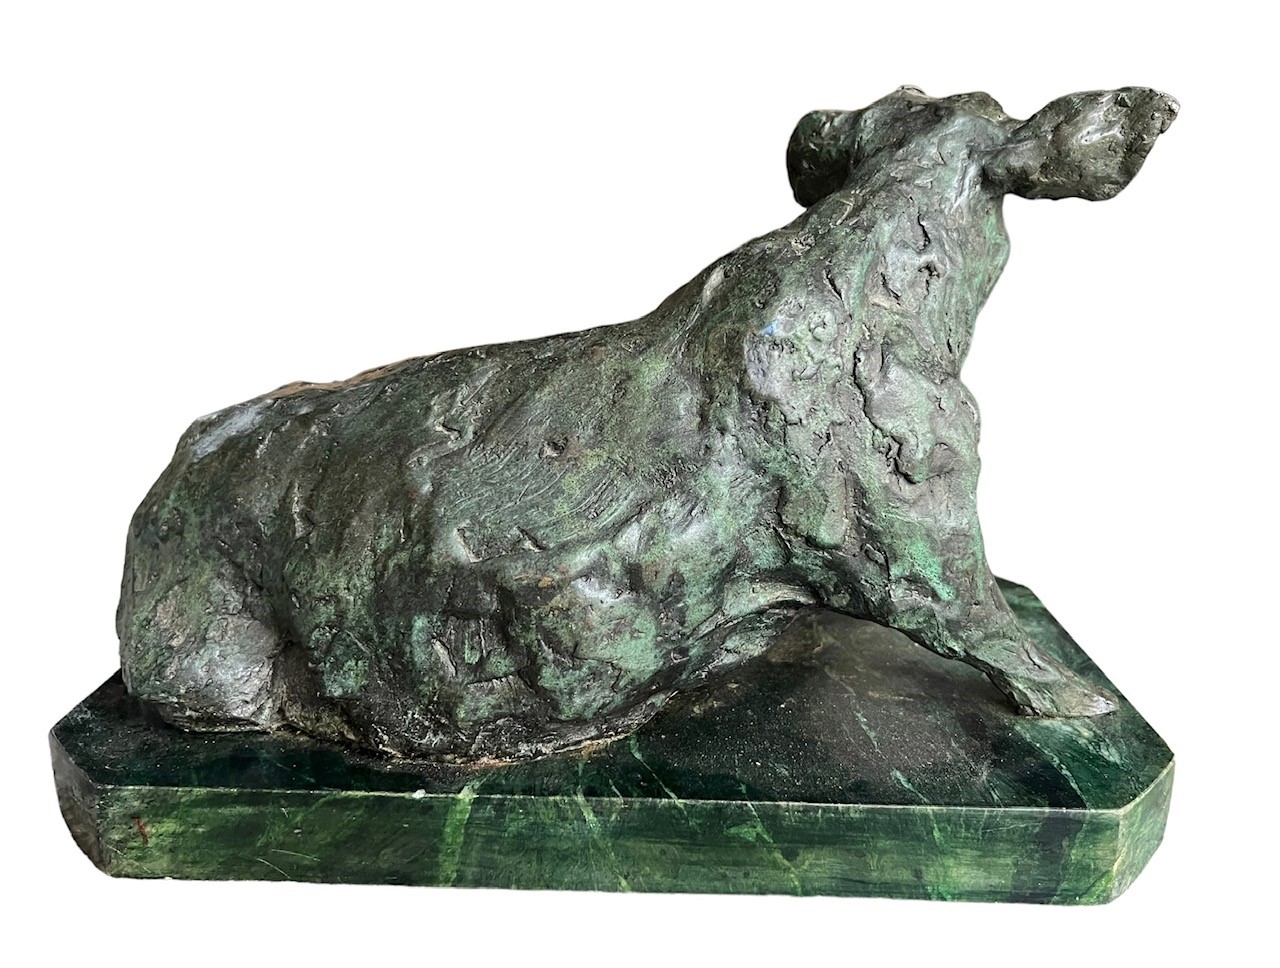 A DECORATIVE 20TH CENTURY BRONZE SCULPTURE OF A SEATED PIG Raised on a marble plinth base, - Image 6 of 8